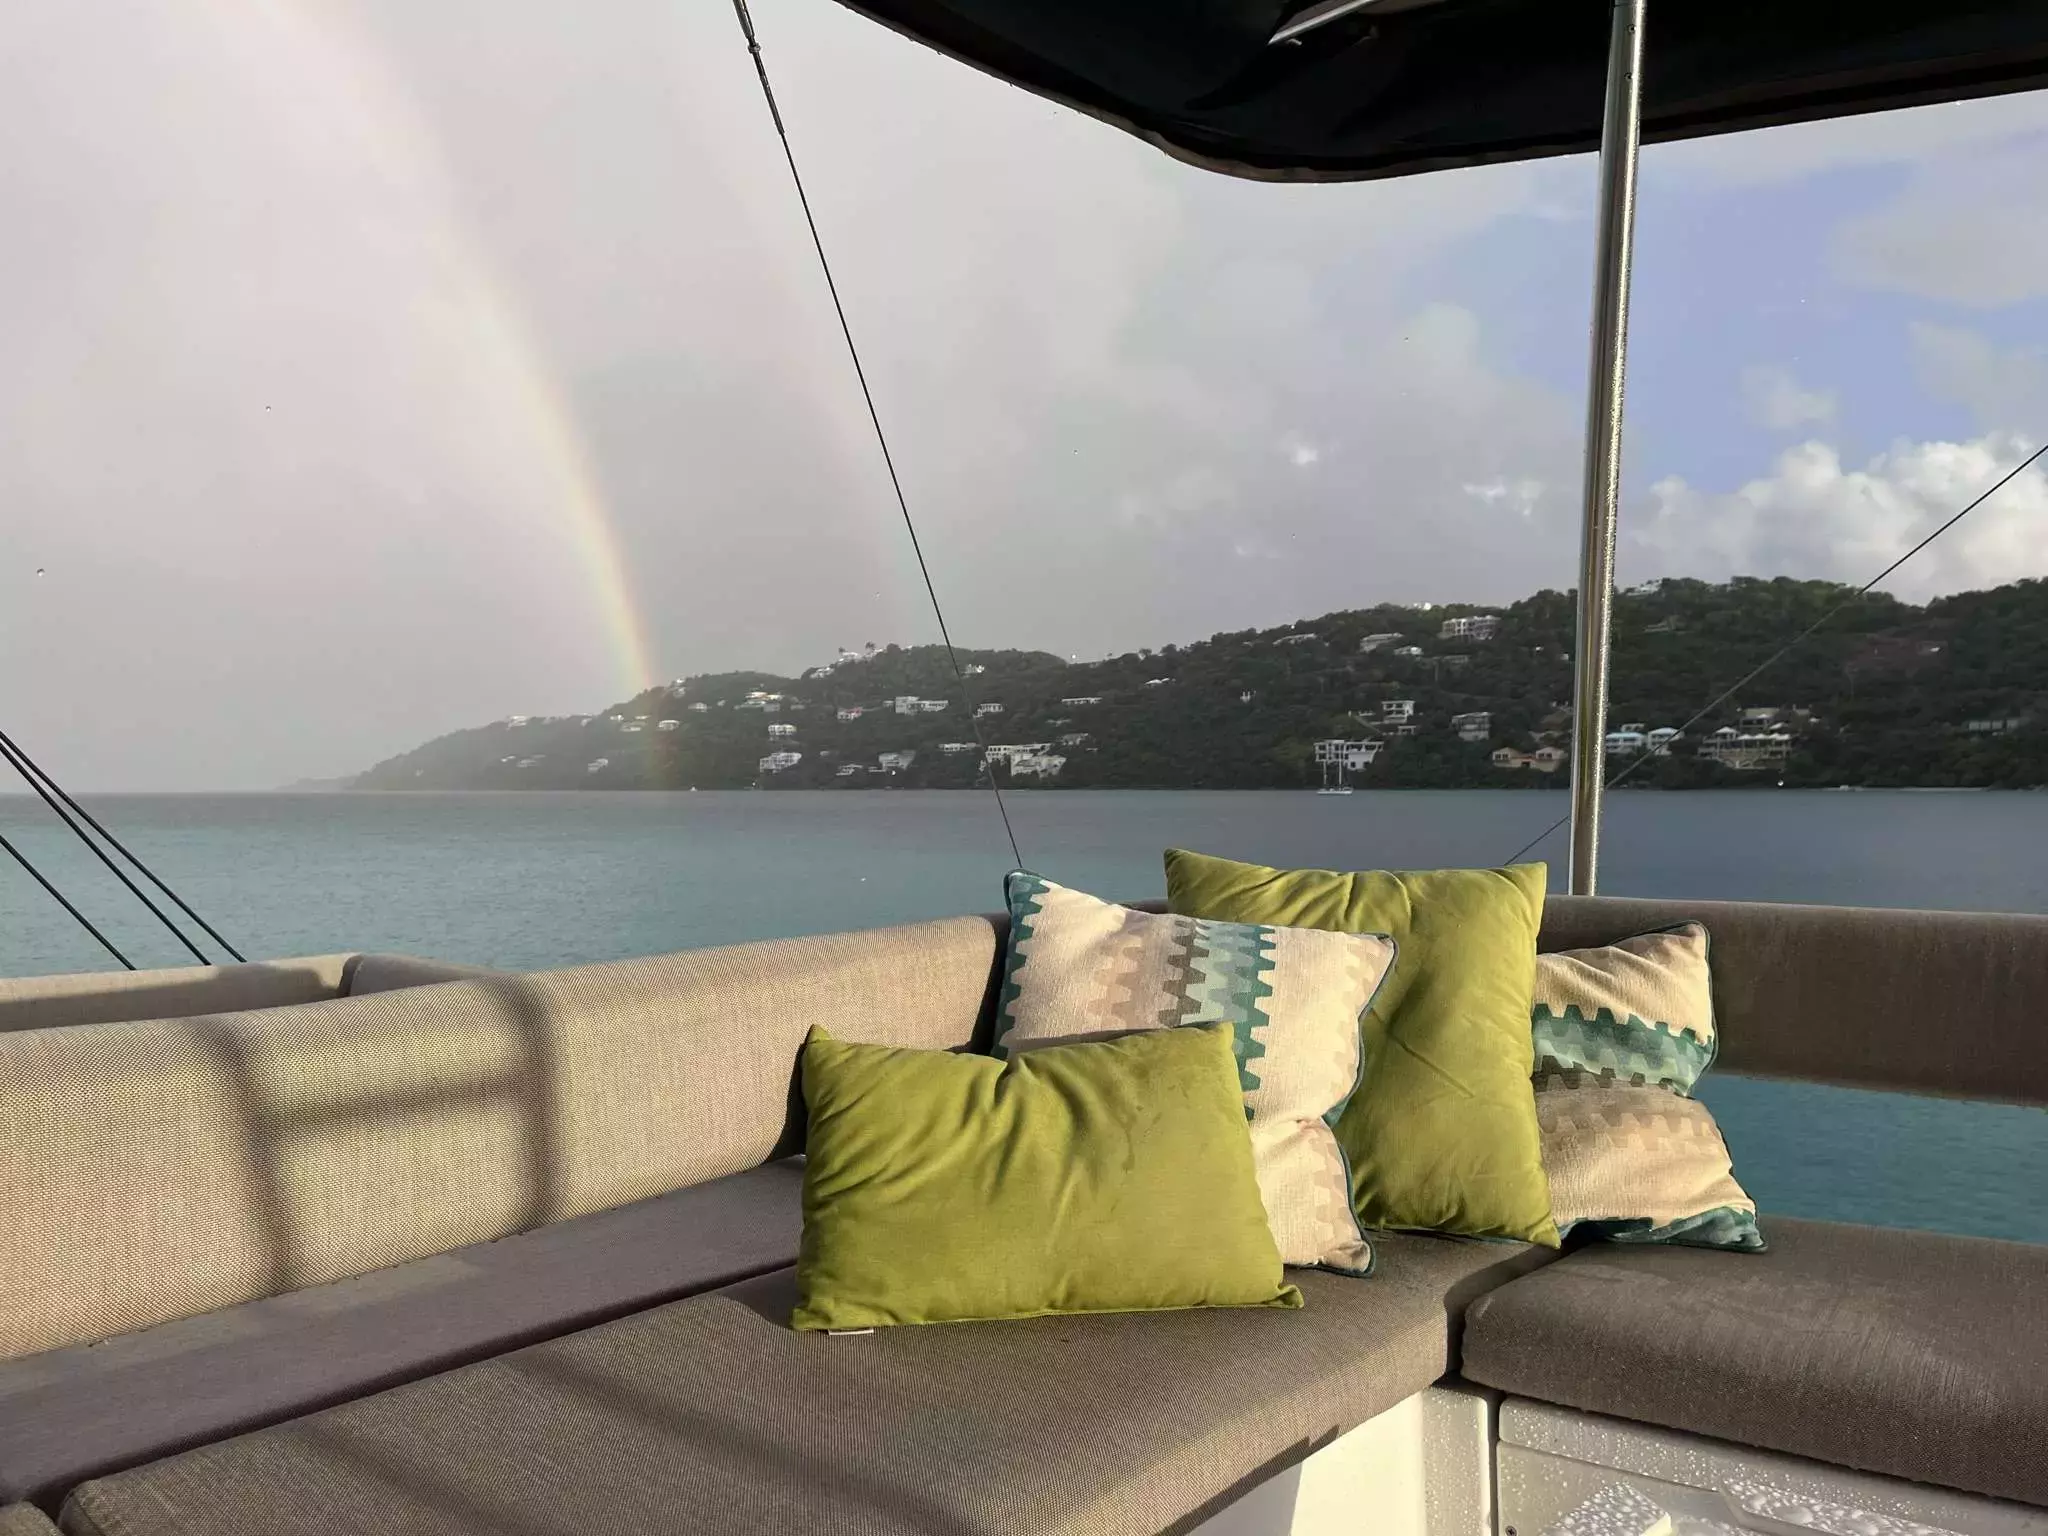 Ithaka by Bali Catamarans - Special Offer for a private Sailing Catamaran Charter in Tortola with a crew